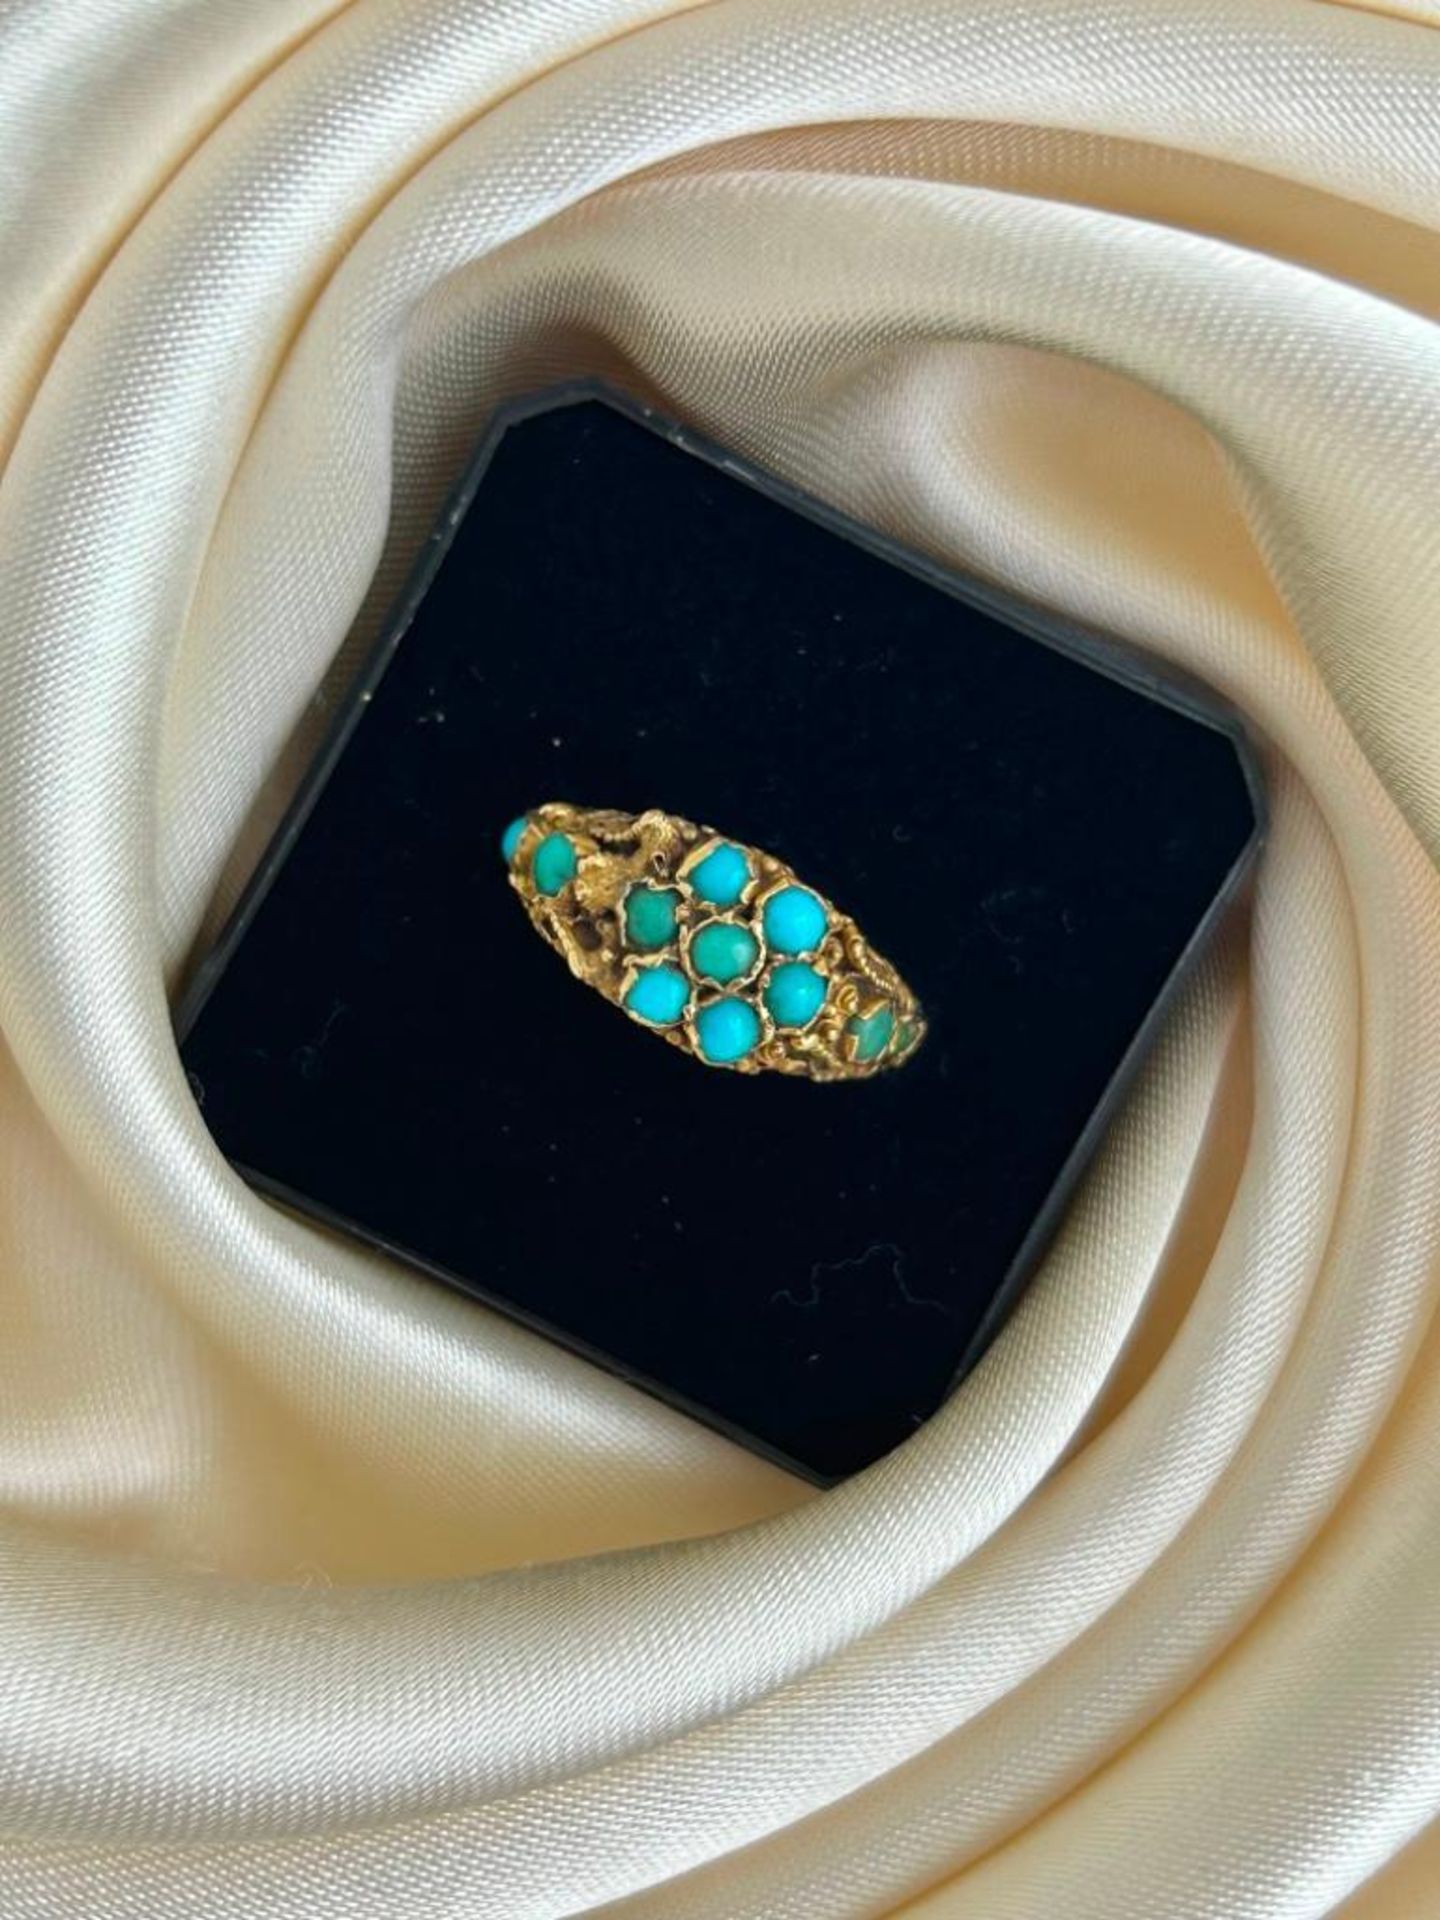 Chunky Antique 9ct Gold Turquoise Ring - Image 4 of 6